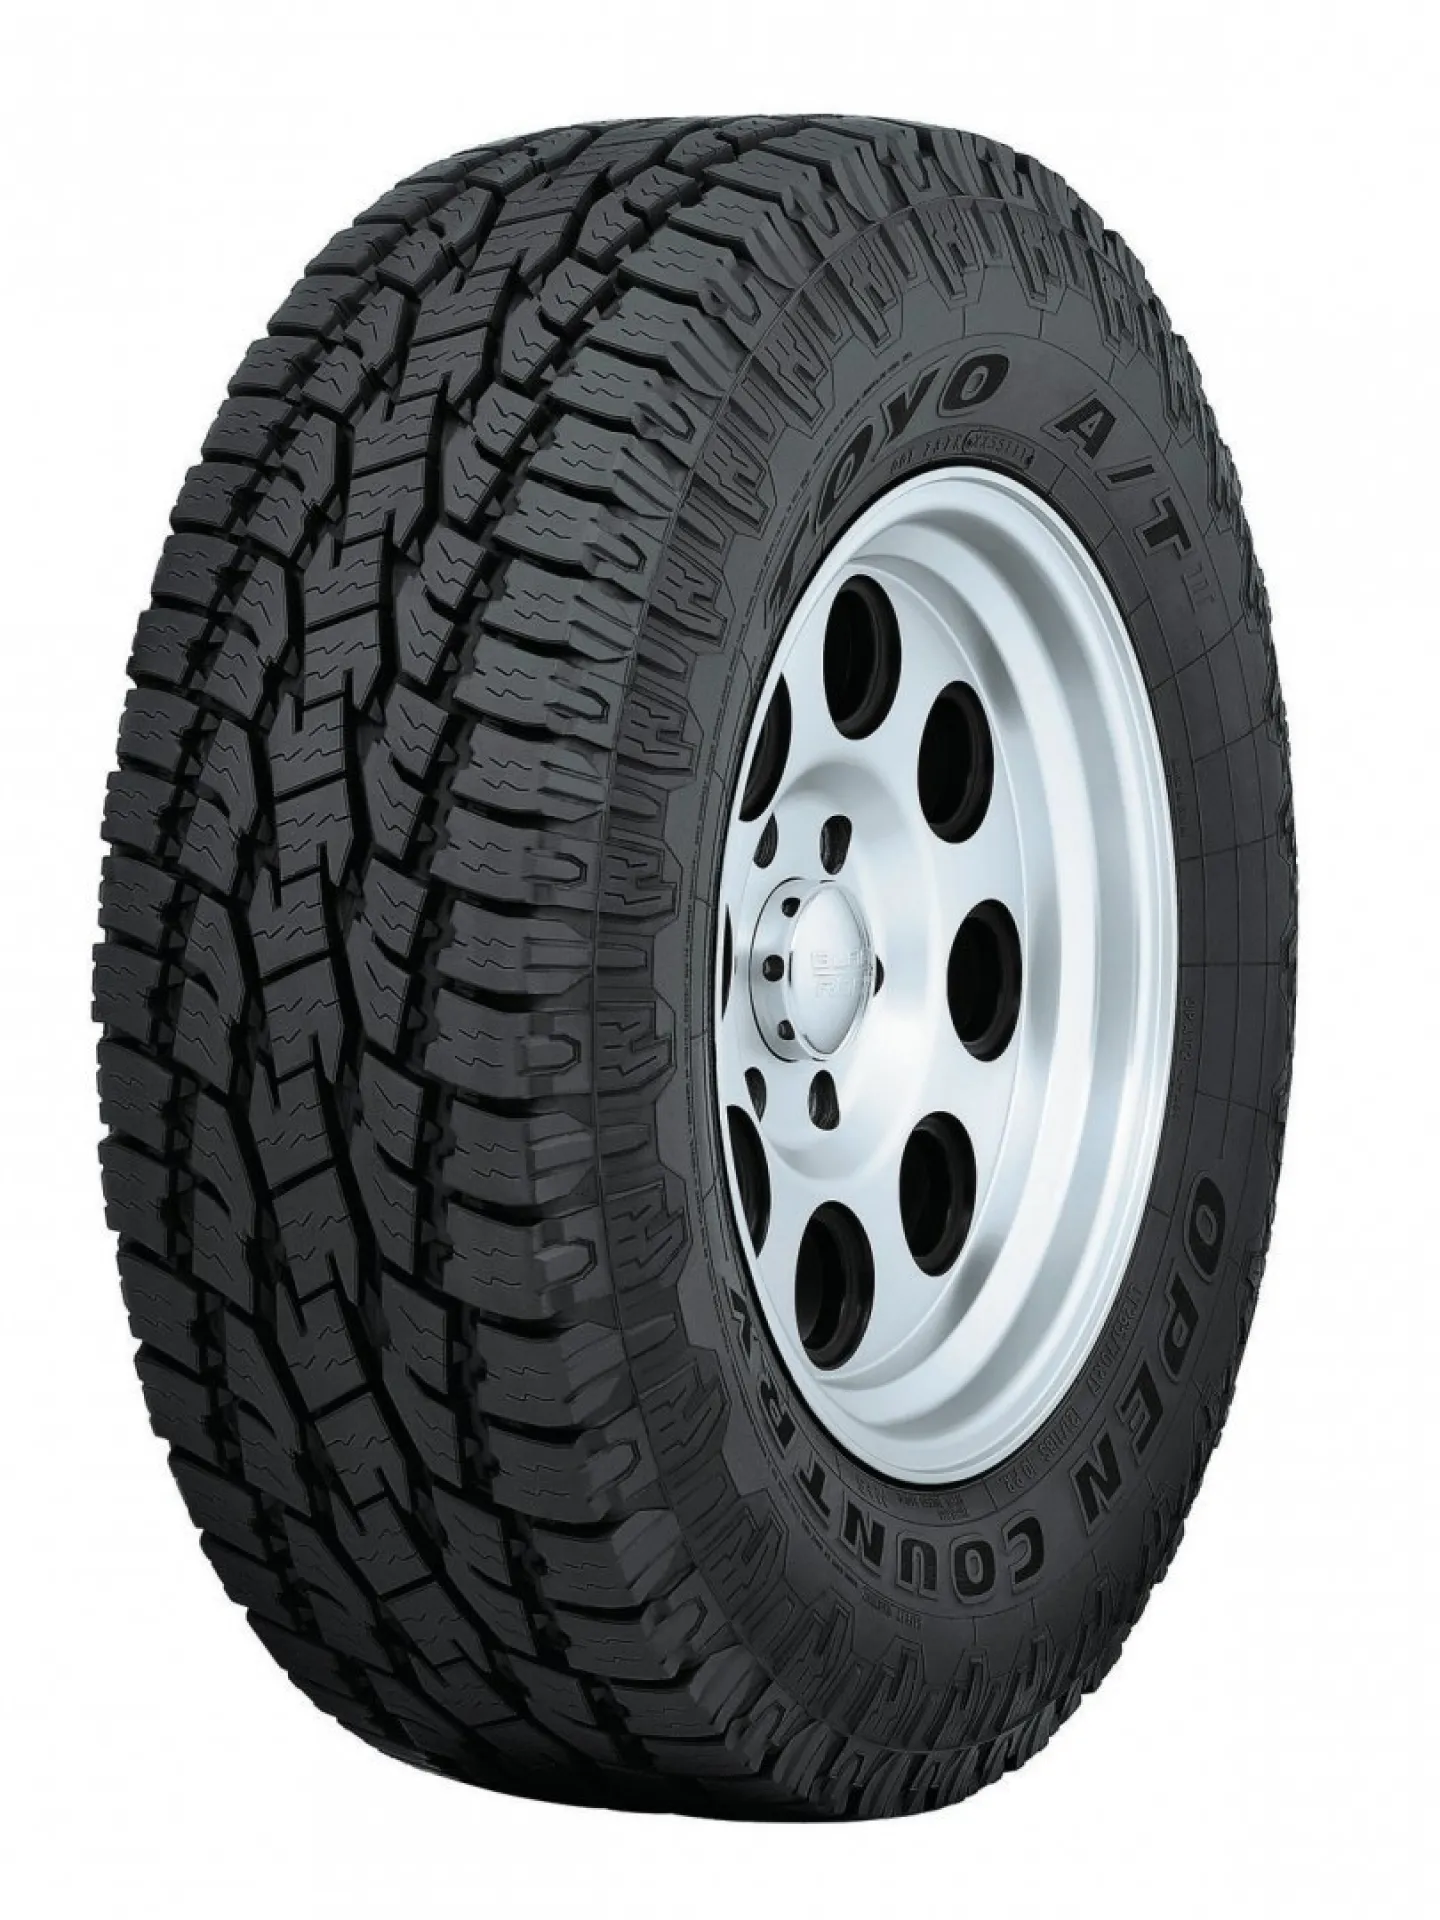 Toyo Open Country A T Plus 245 65r17 111h Xl Suv Tyres Express Shipping Sowdentyres Co Uk